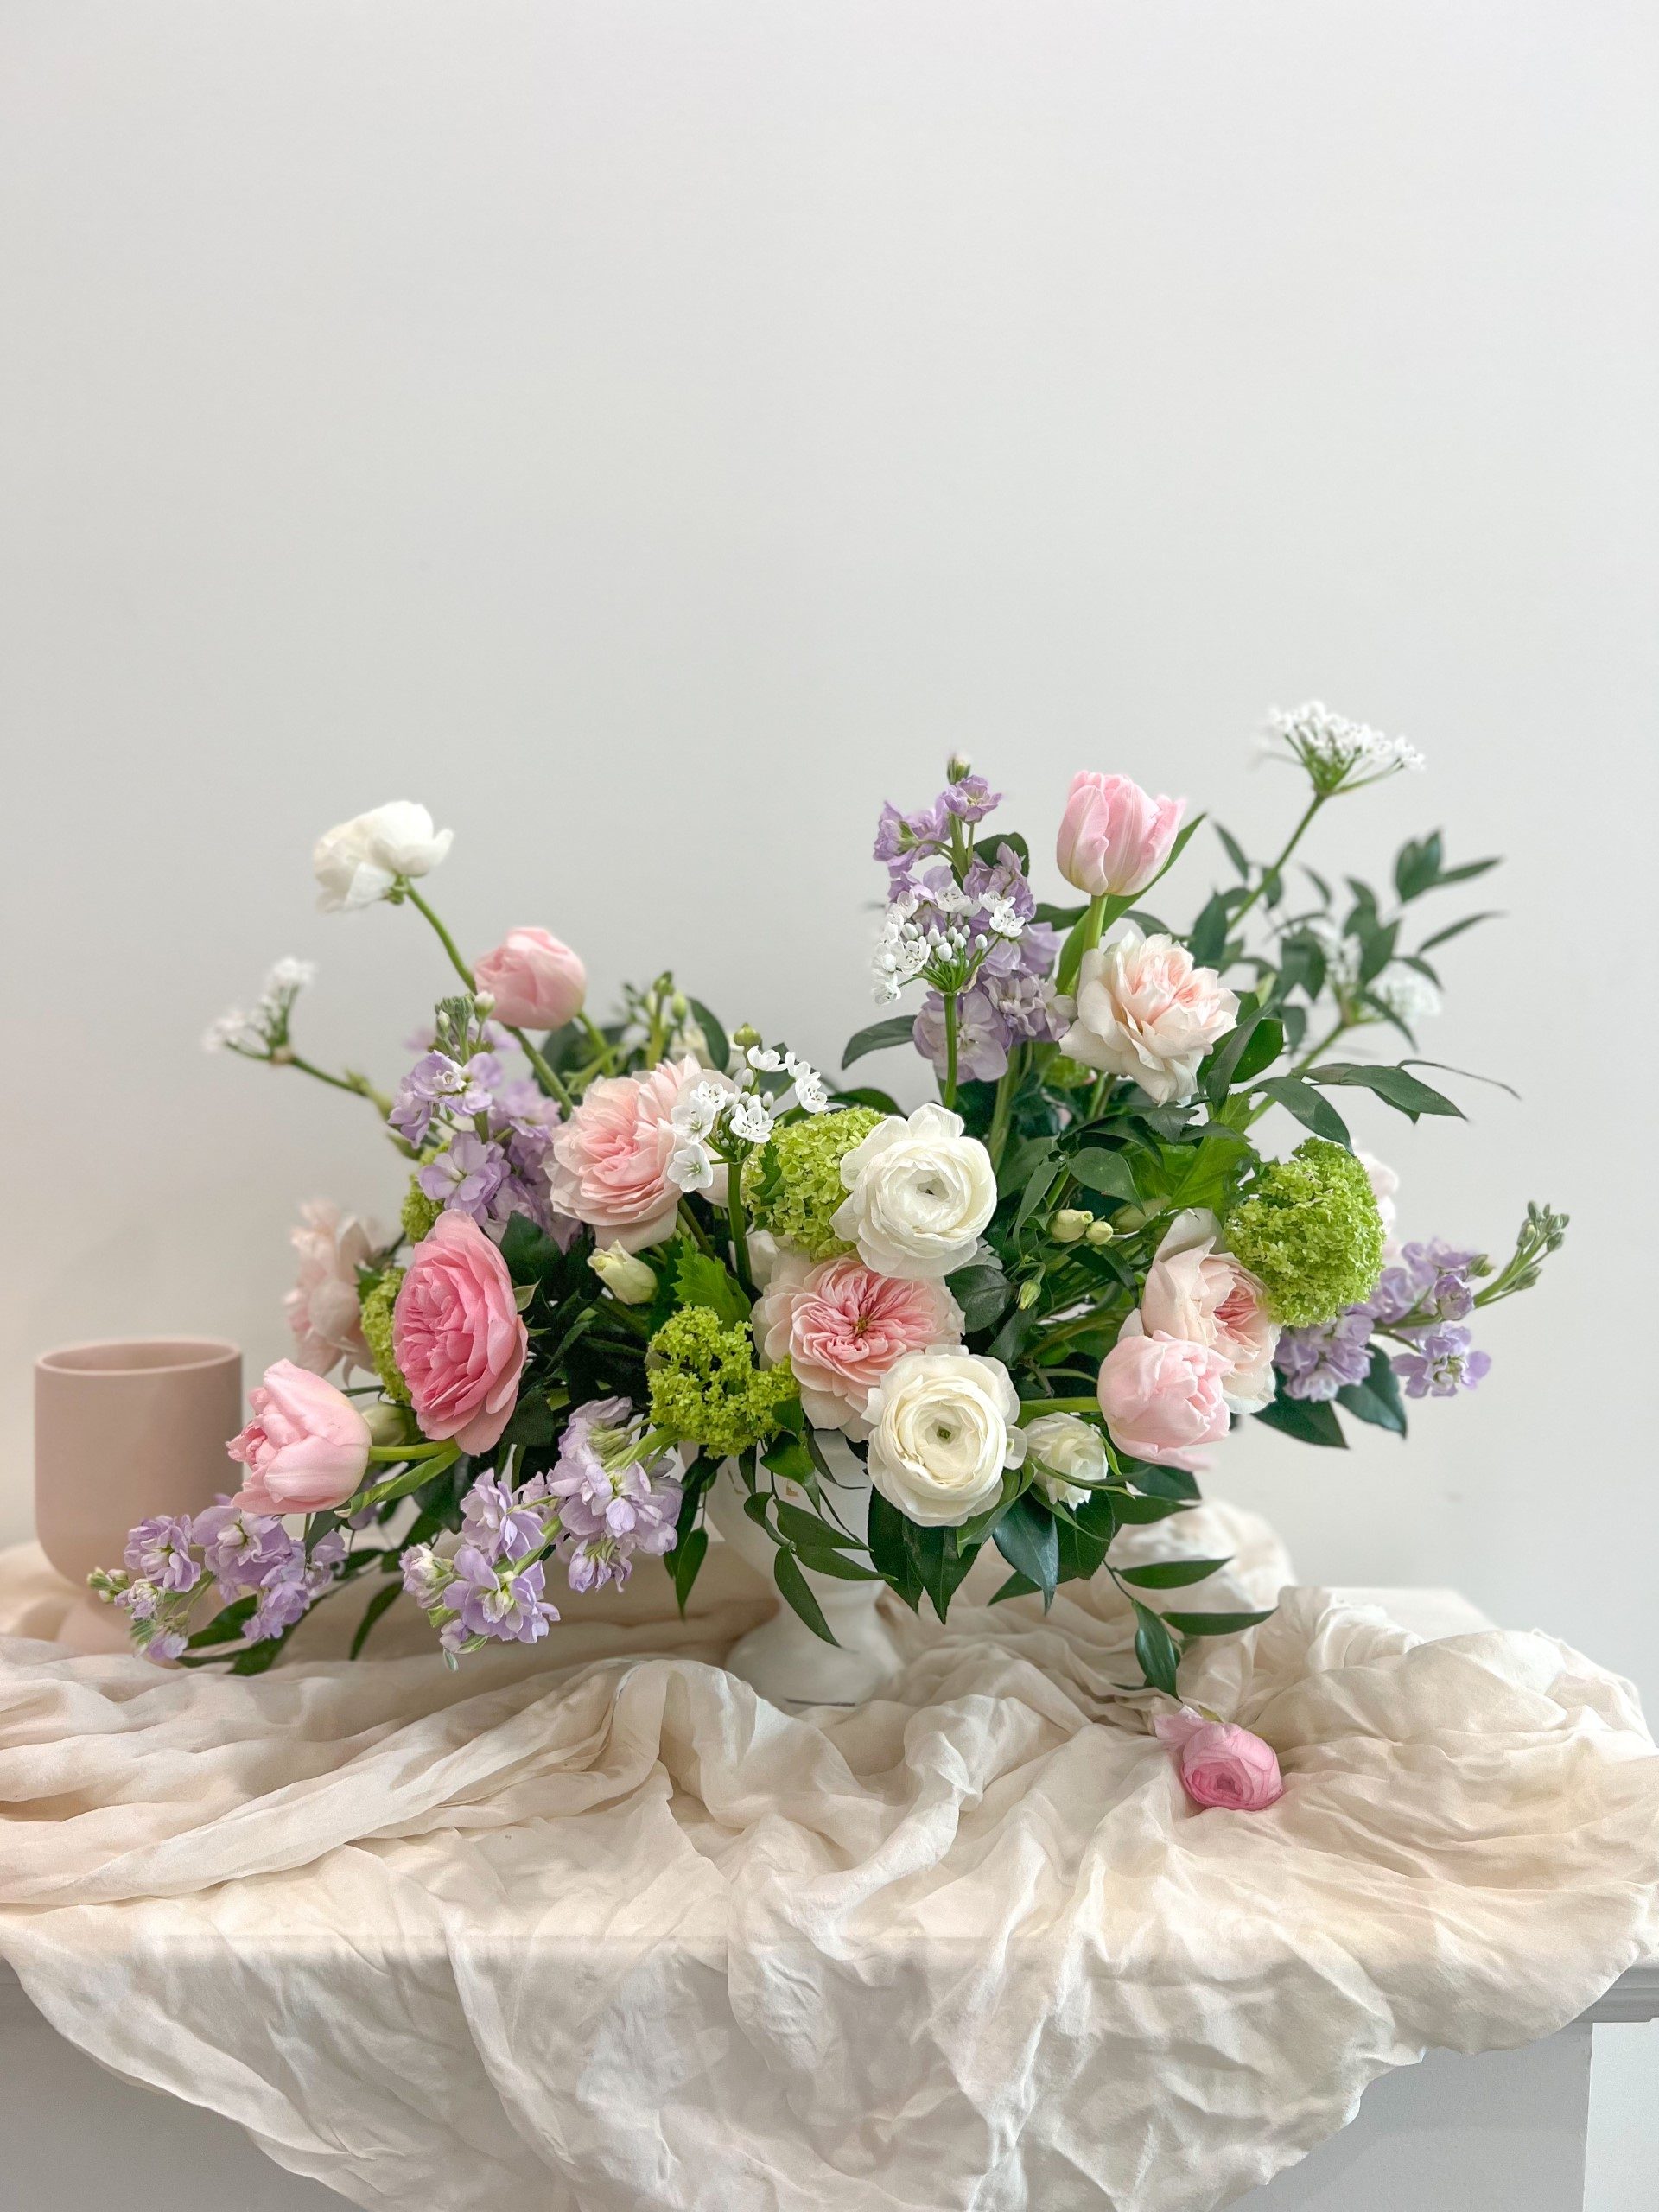 A gorgeous arrangement in an organic style full of depth and texture with fragrant blooms